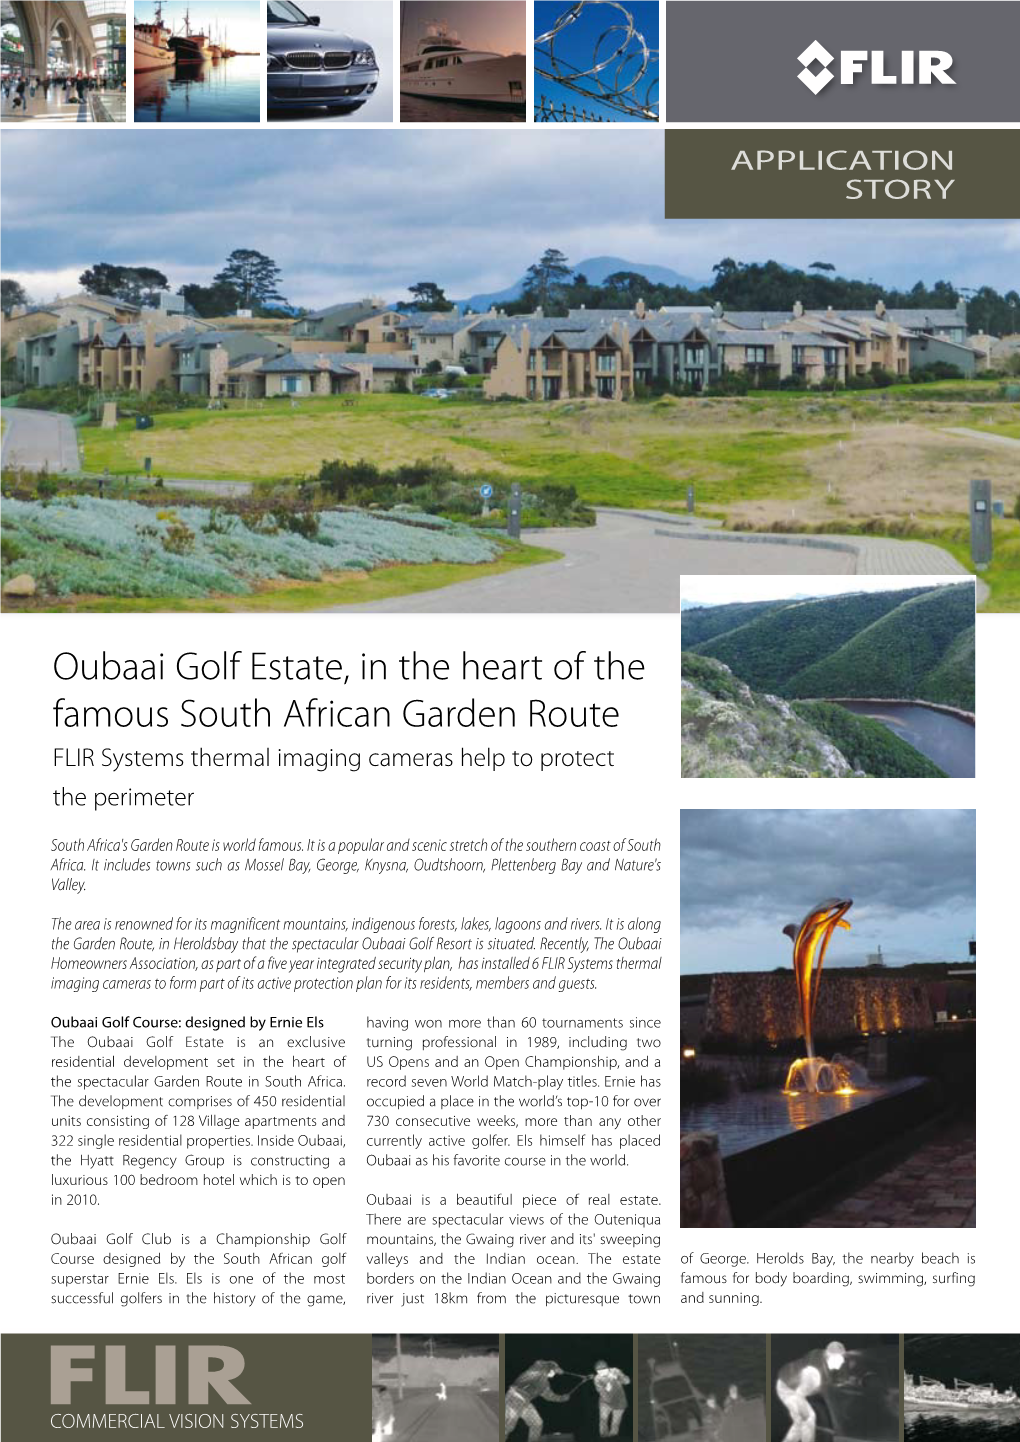 Oubaai Golf Estate, in the Heart of the Famous South African Garden Route FLIR Systems Thermal Imaging Cameras Help to Protect the Perimeter